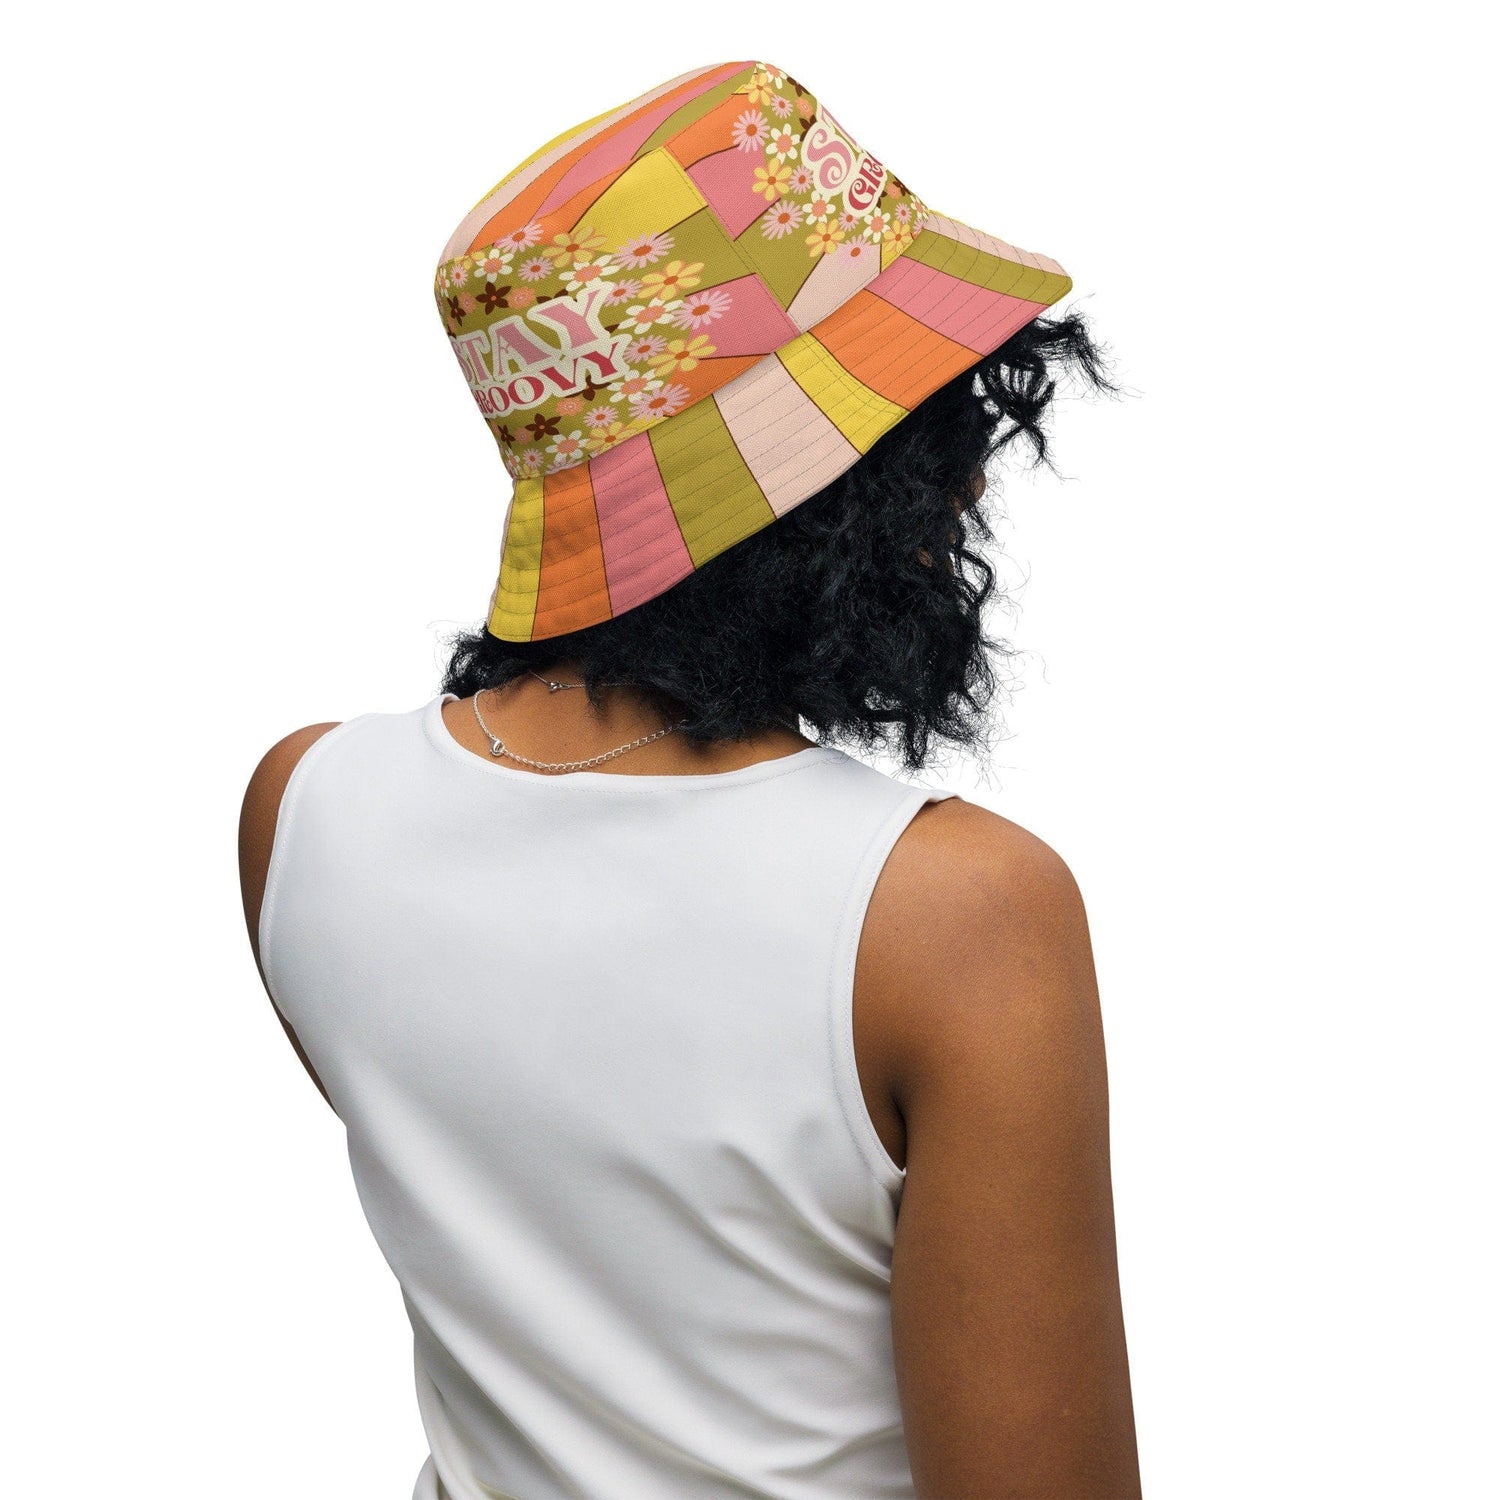 Kate McEnroe New York 70s Groovy Hippie Sunkissed Reversible Bucket HatHats63C775721B24A_16361